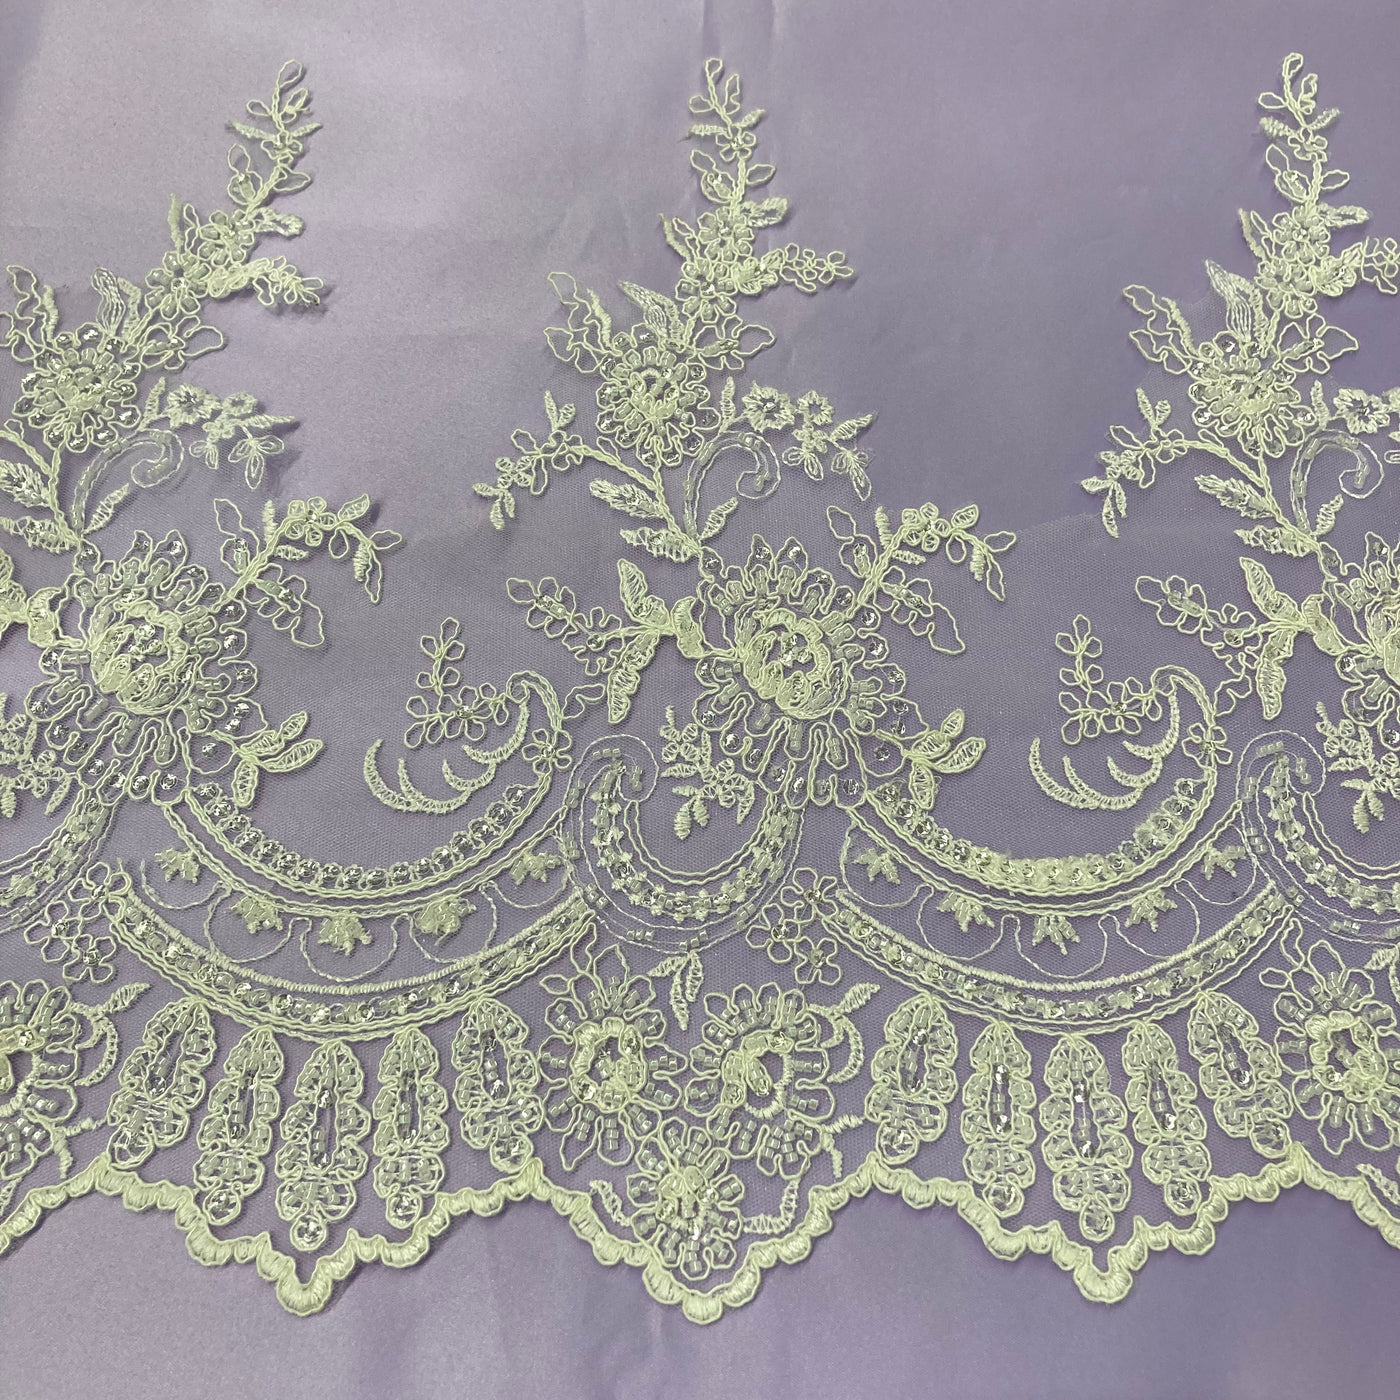 Beaded & Corded Lace Trimming Embroidered on 100% Polyester Net Mesh. Lace USA